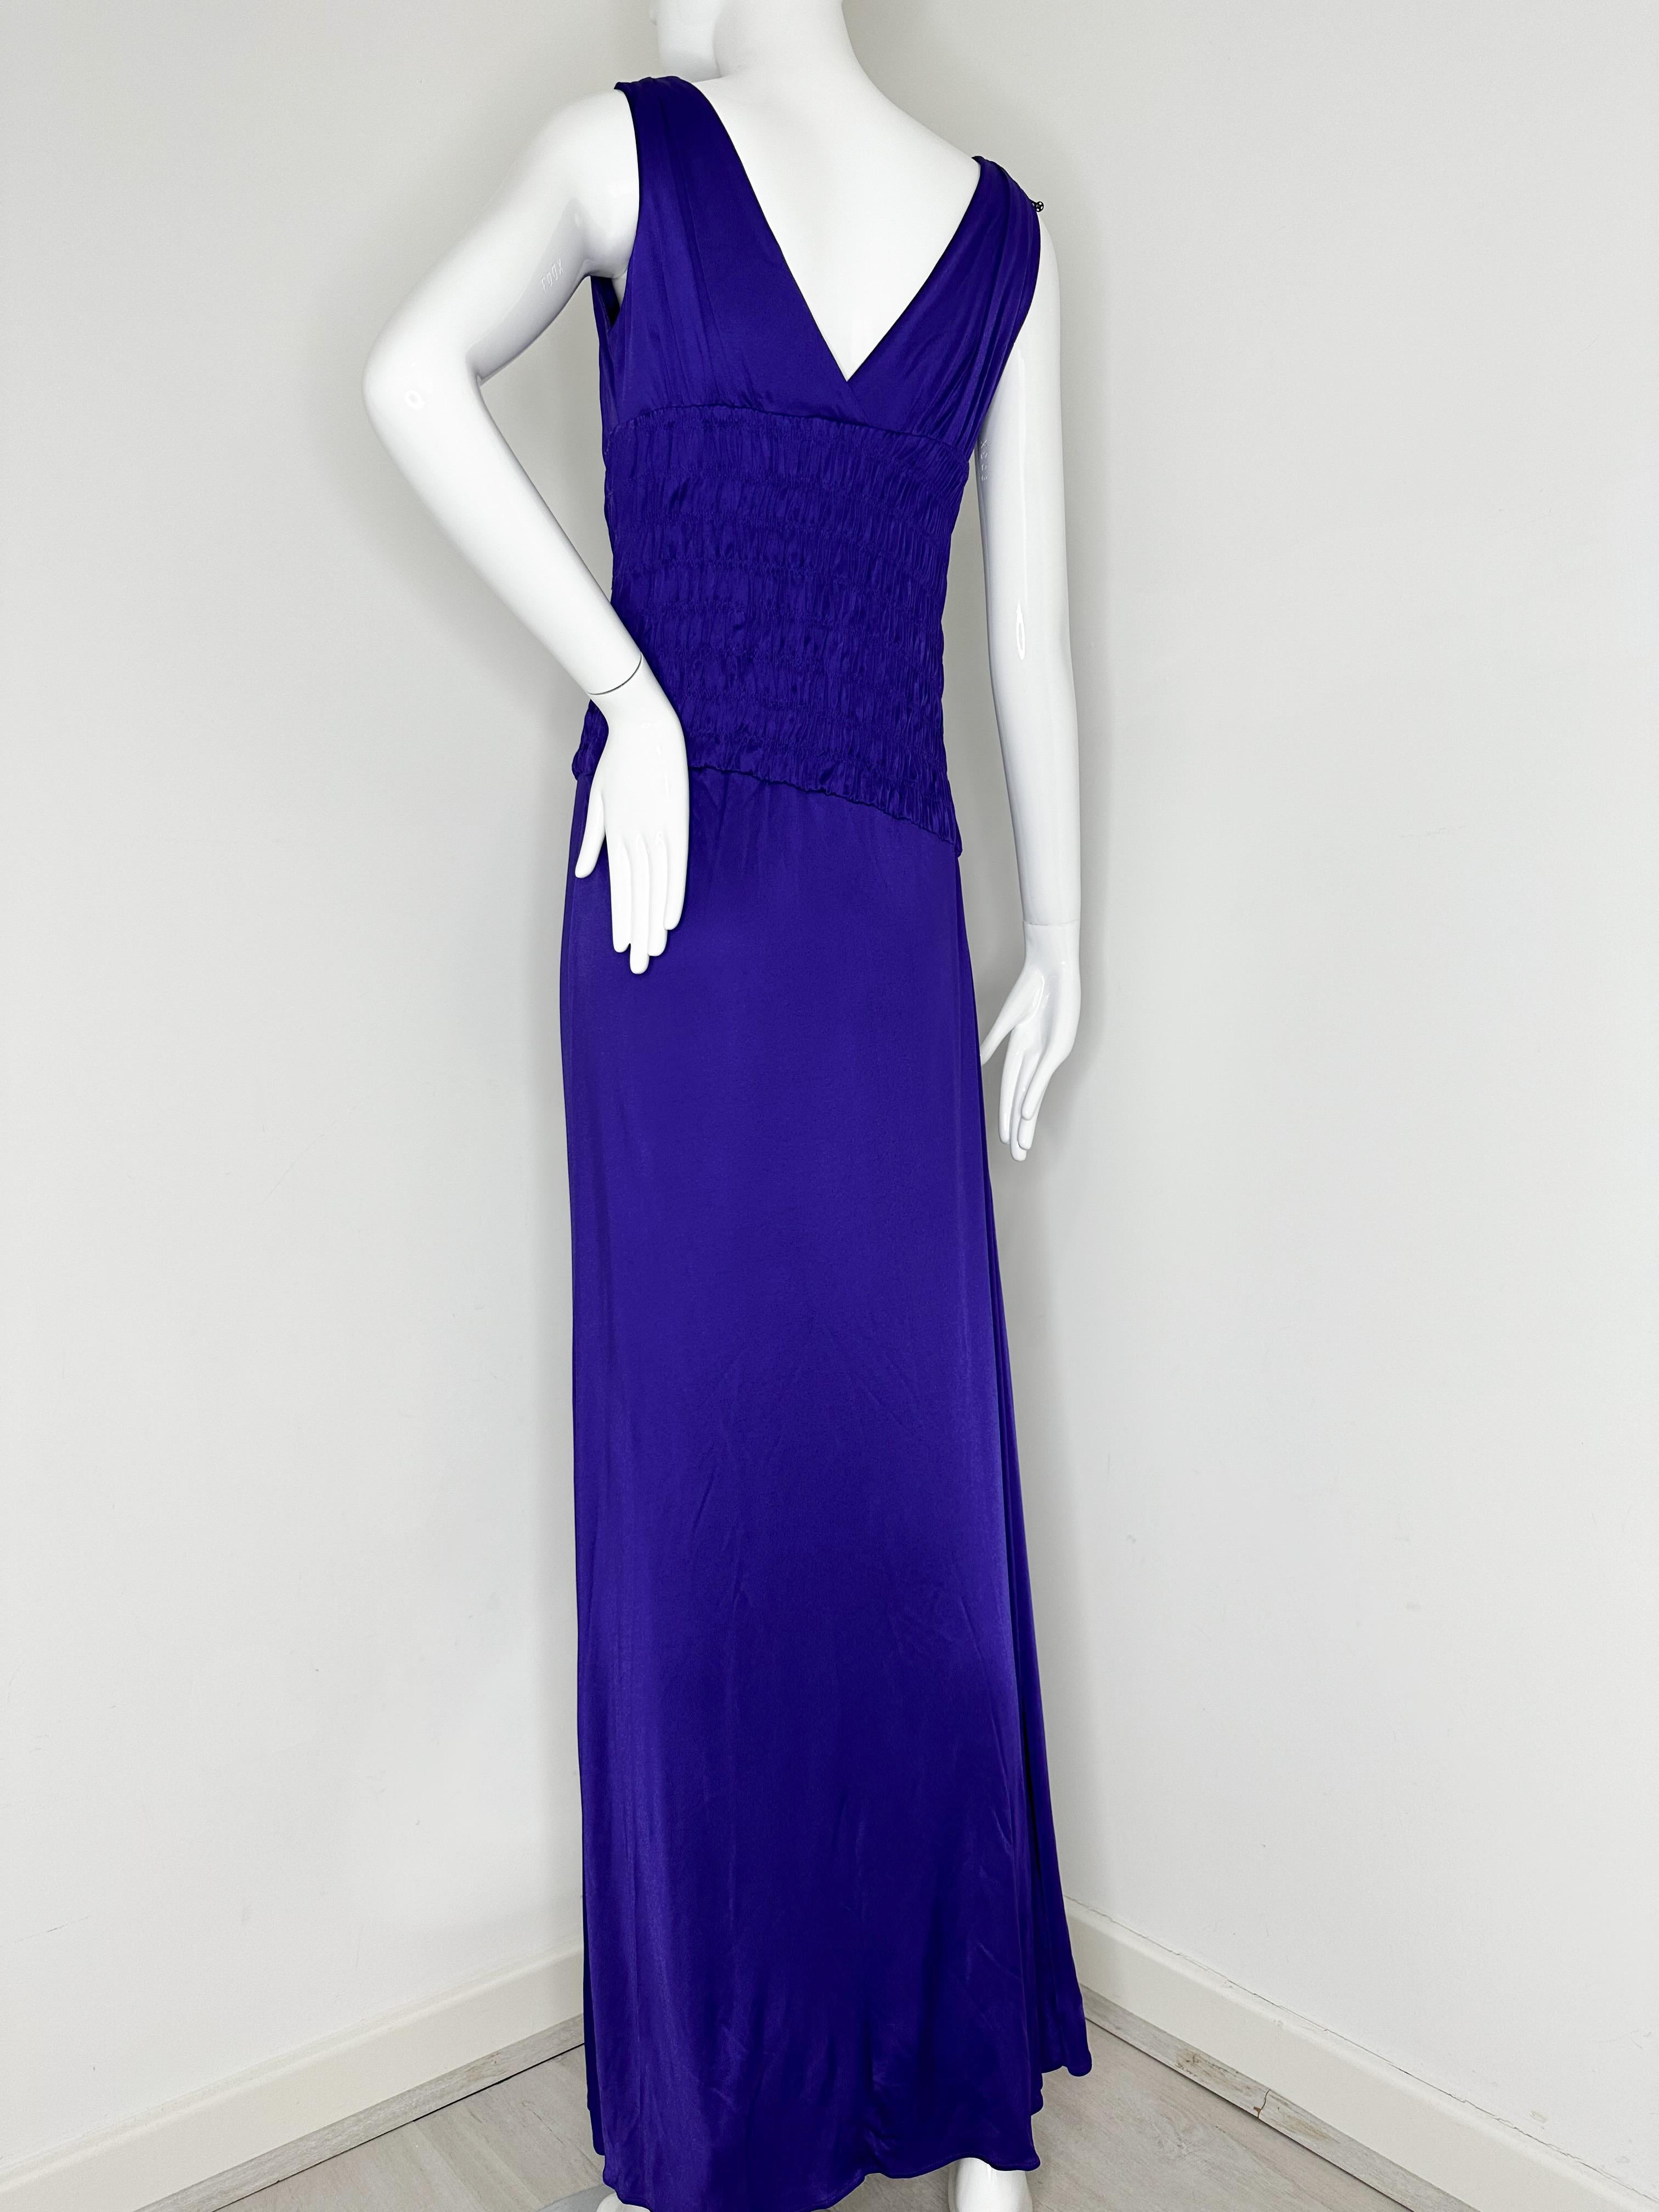 Christian Dior by John Galliano 2009 purple maxi dress In Good Condition For Sale In Annandale, VA